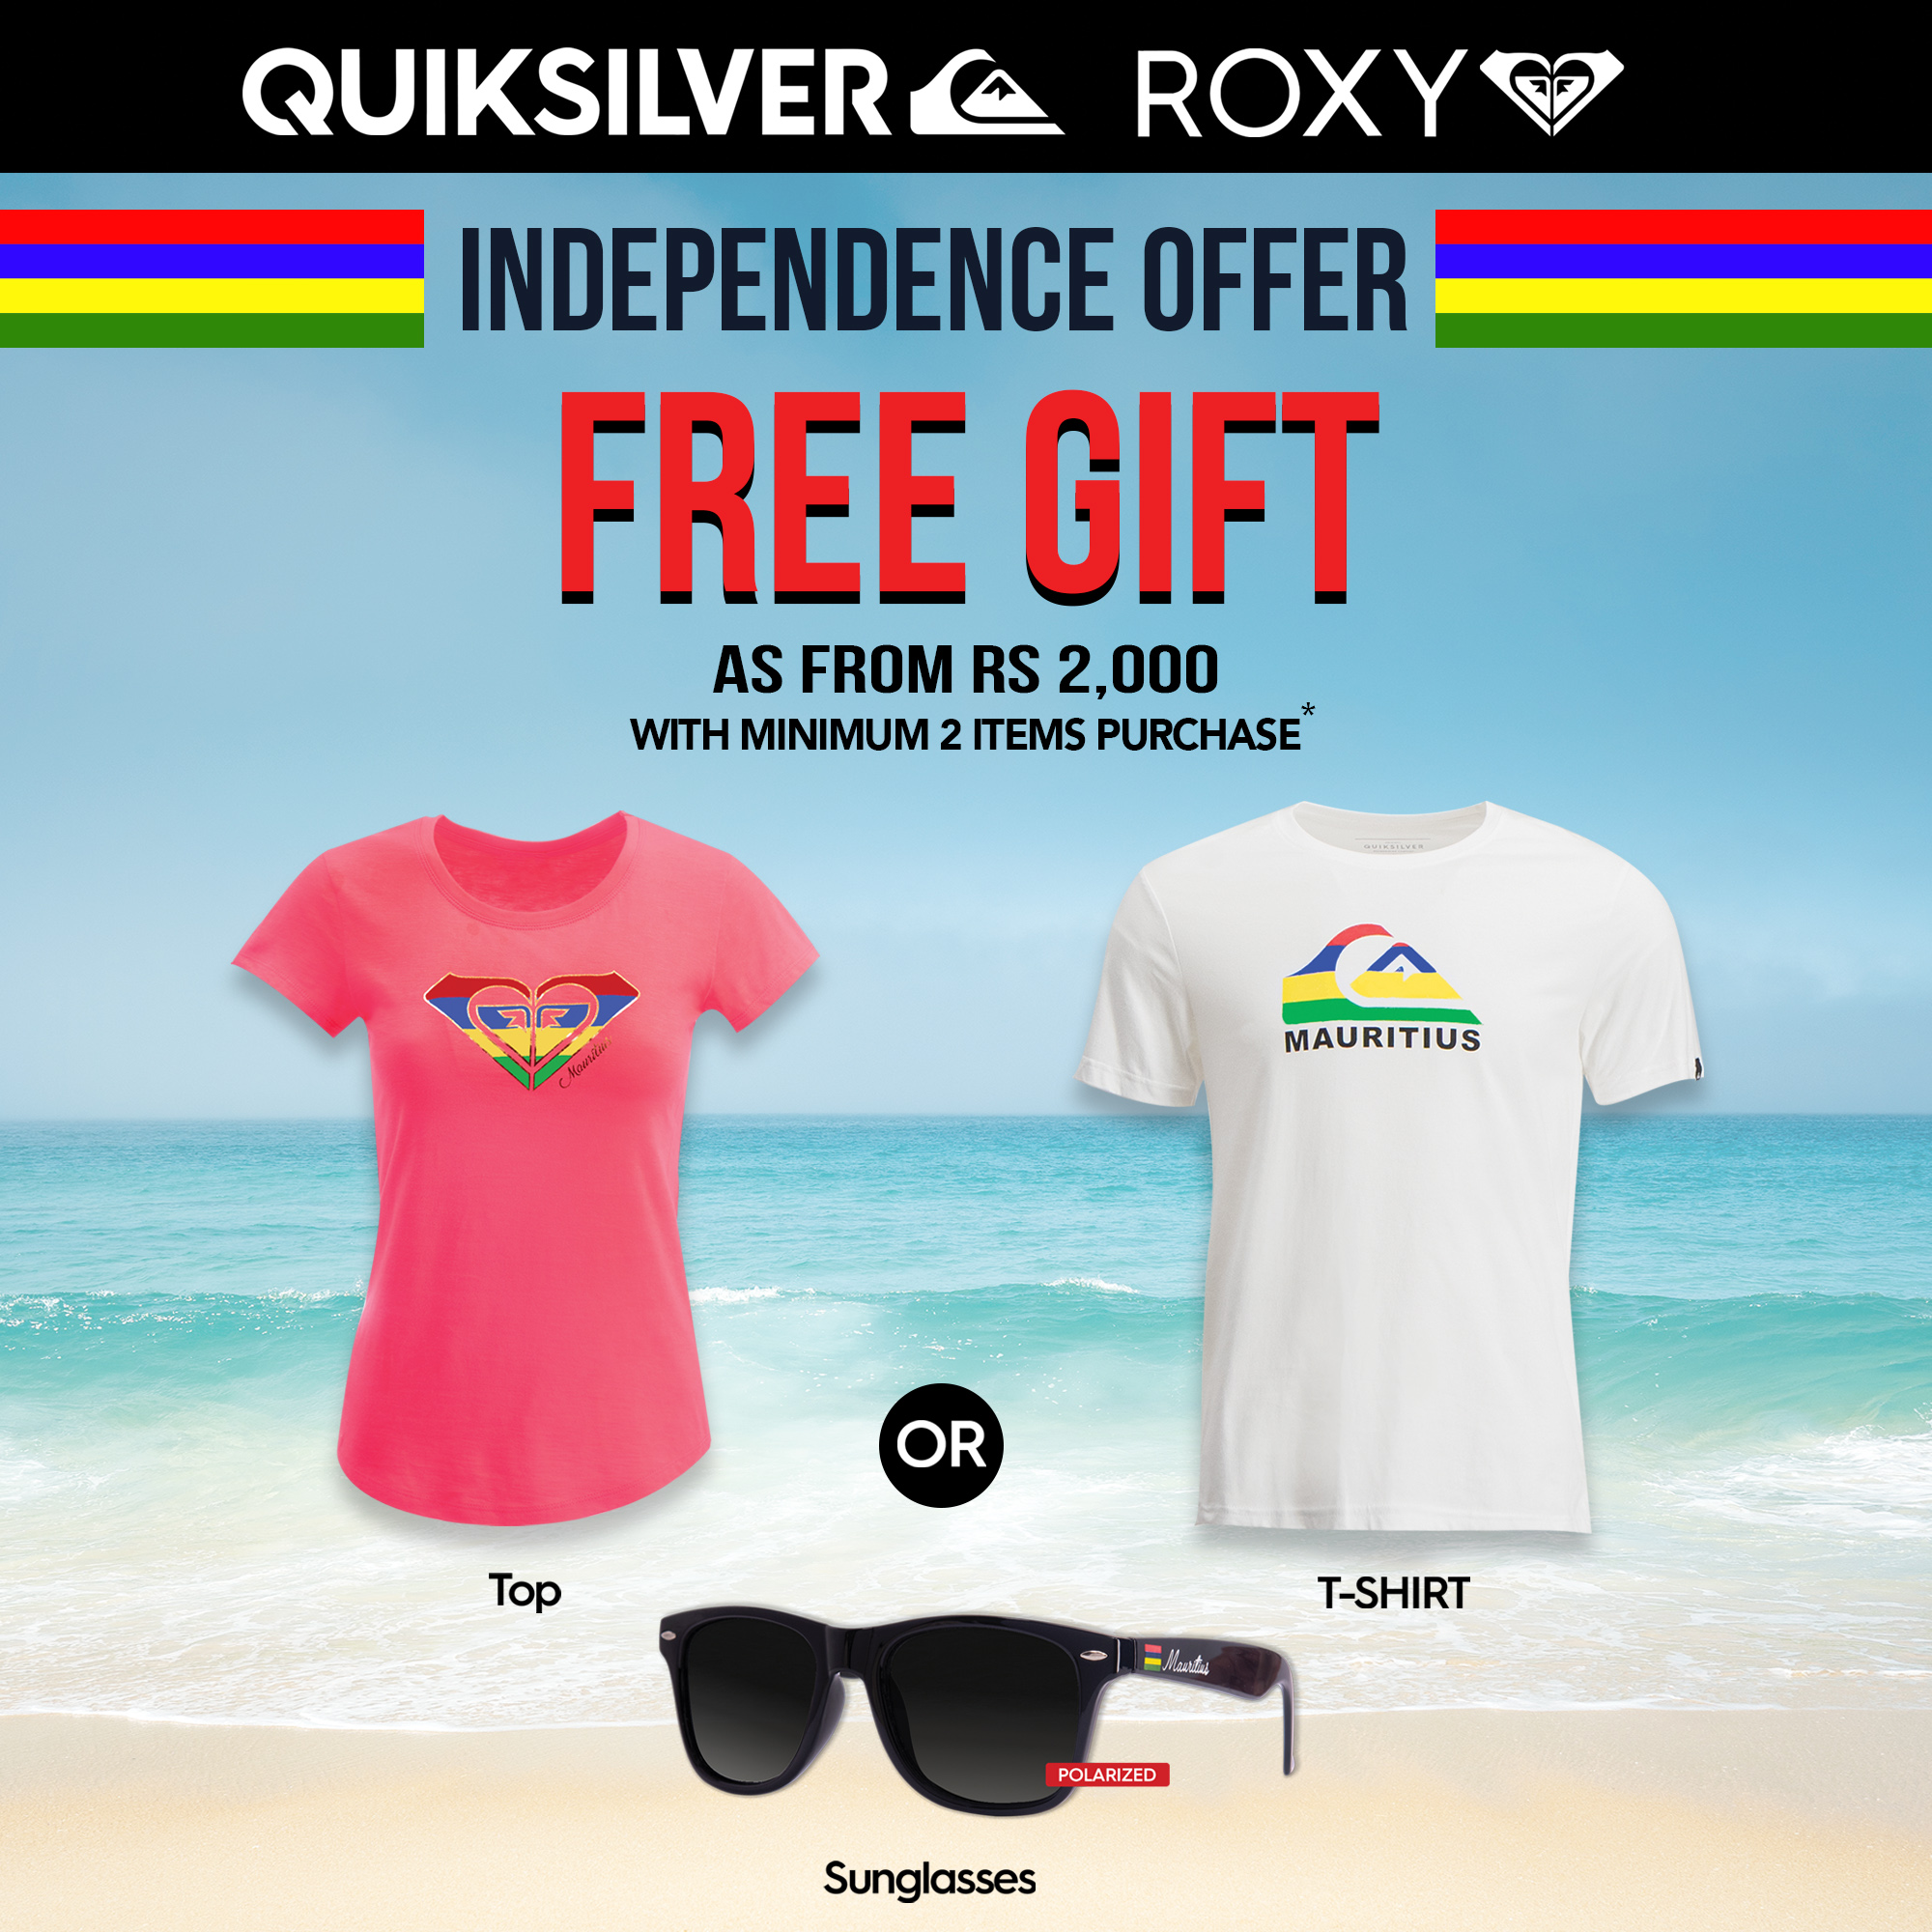 Independence Offer by Quiksilver and Roxy